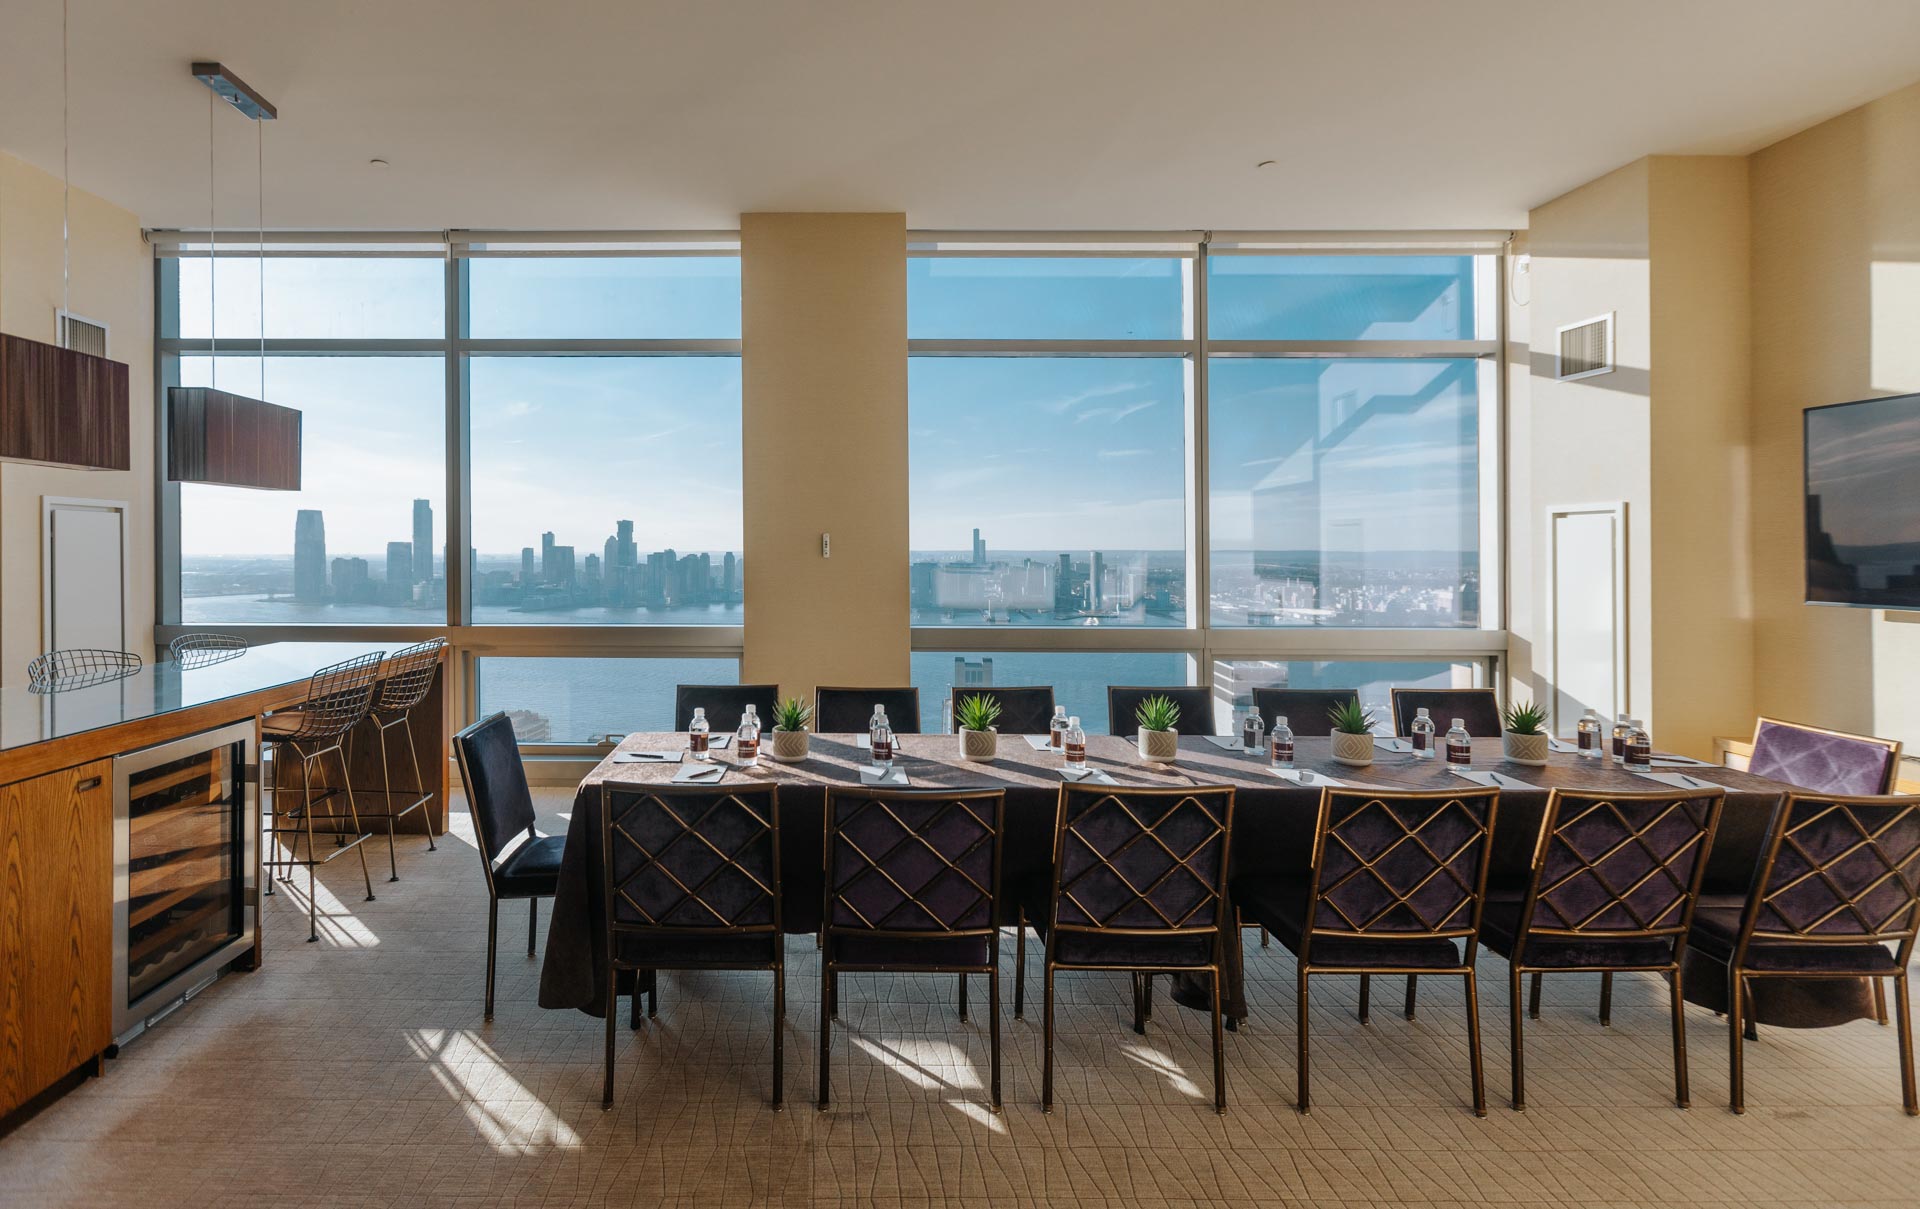 Meeting Room with water view